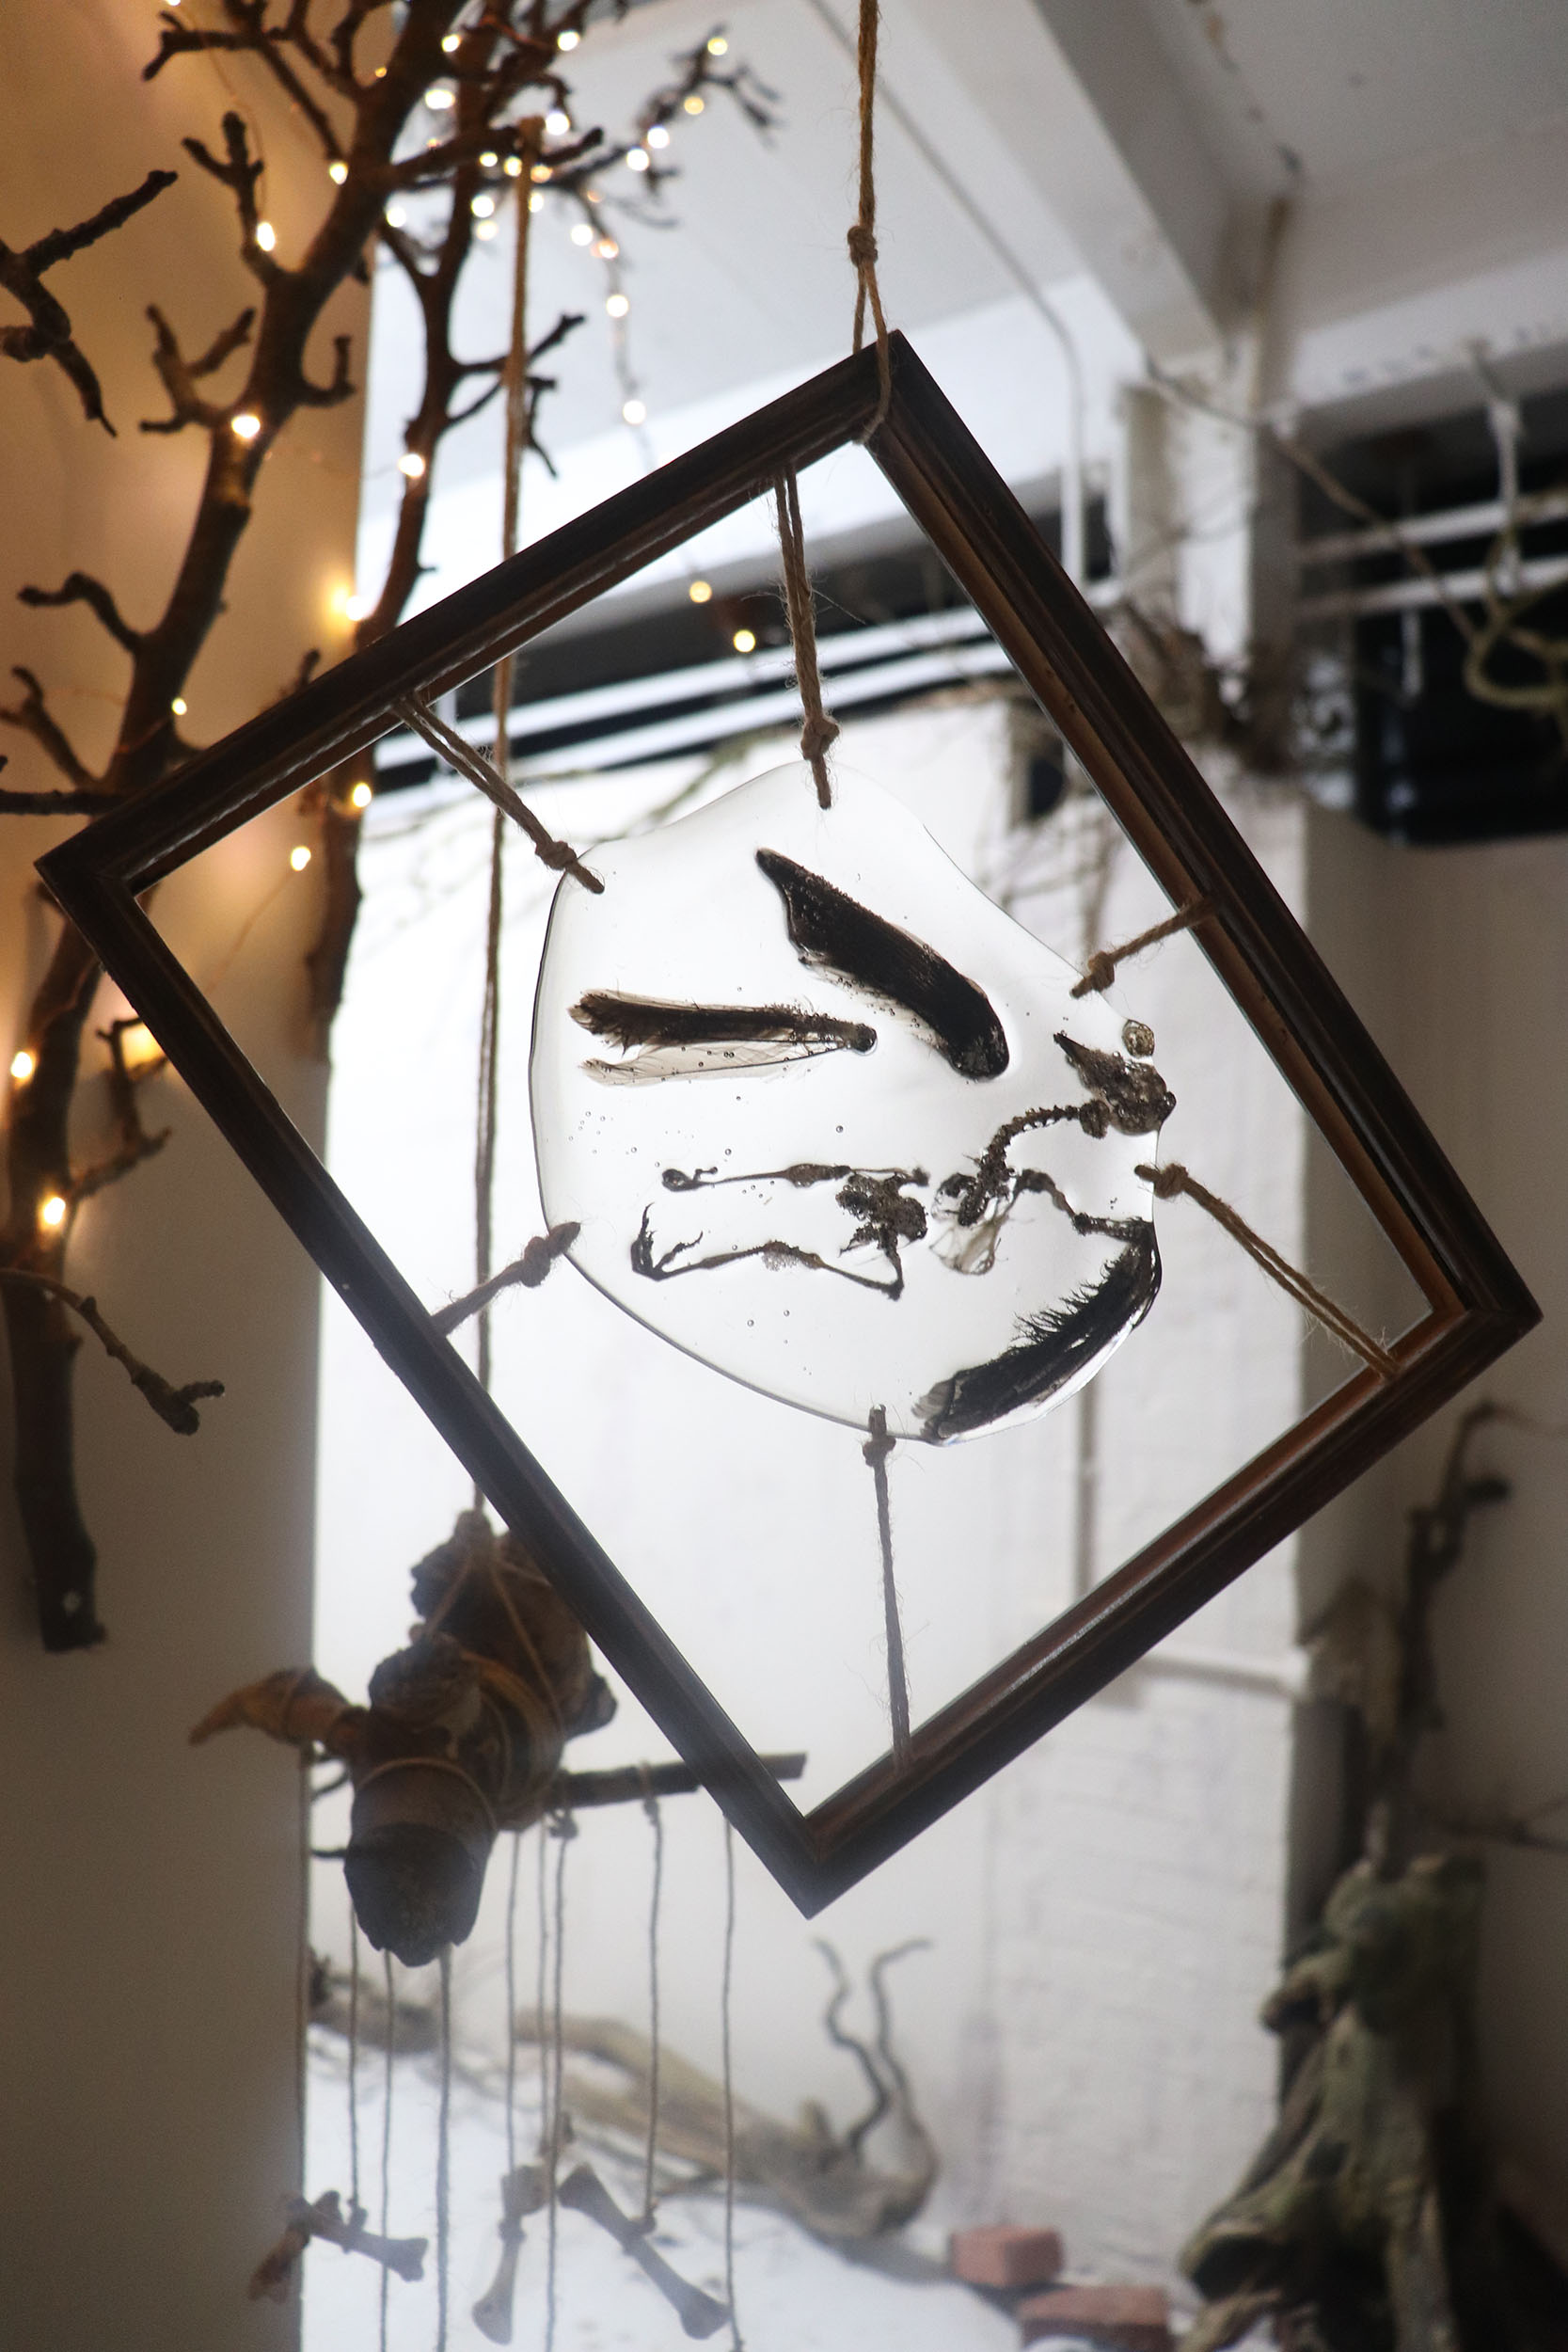 Free hanging artwork by Zoë Bullen, displaying skeletal remains with some feathers, of a cat caught robin, arranged in resin, and suspended within an old wooden picture frame.